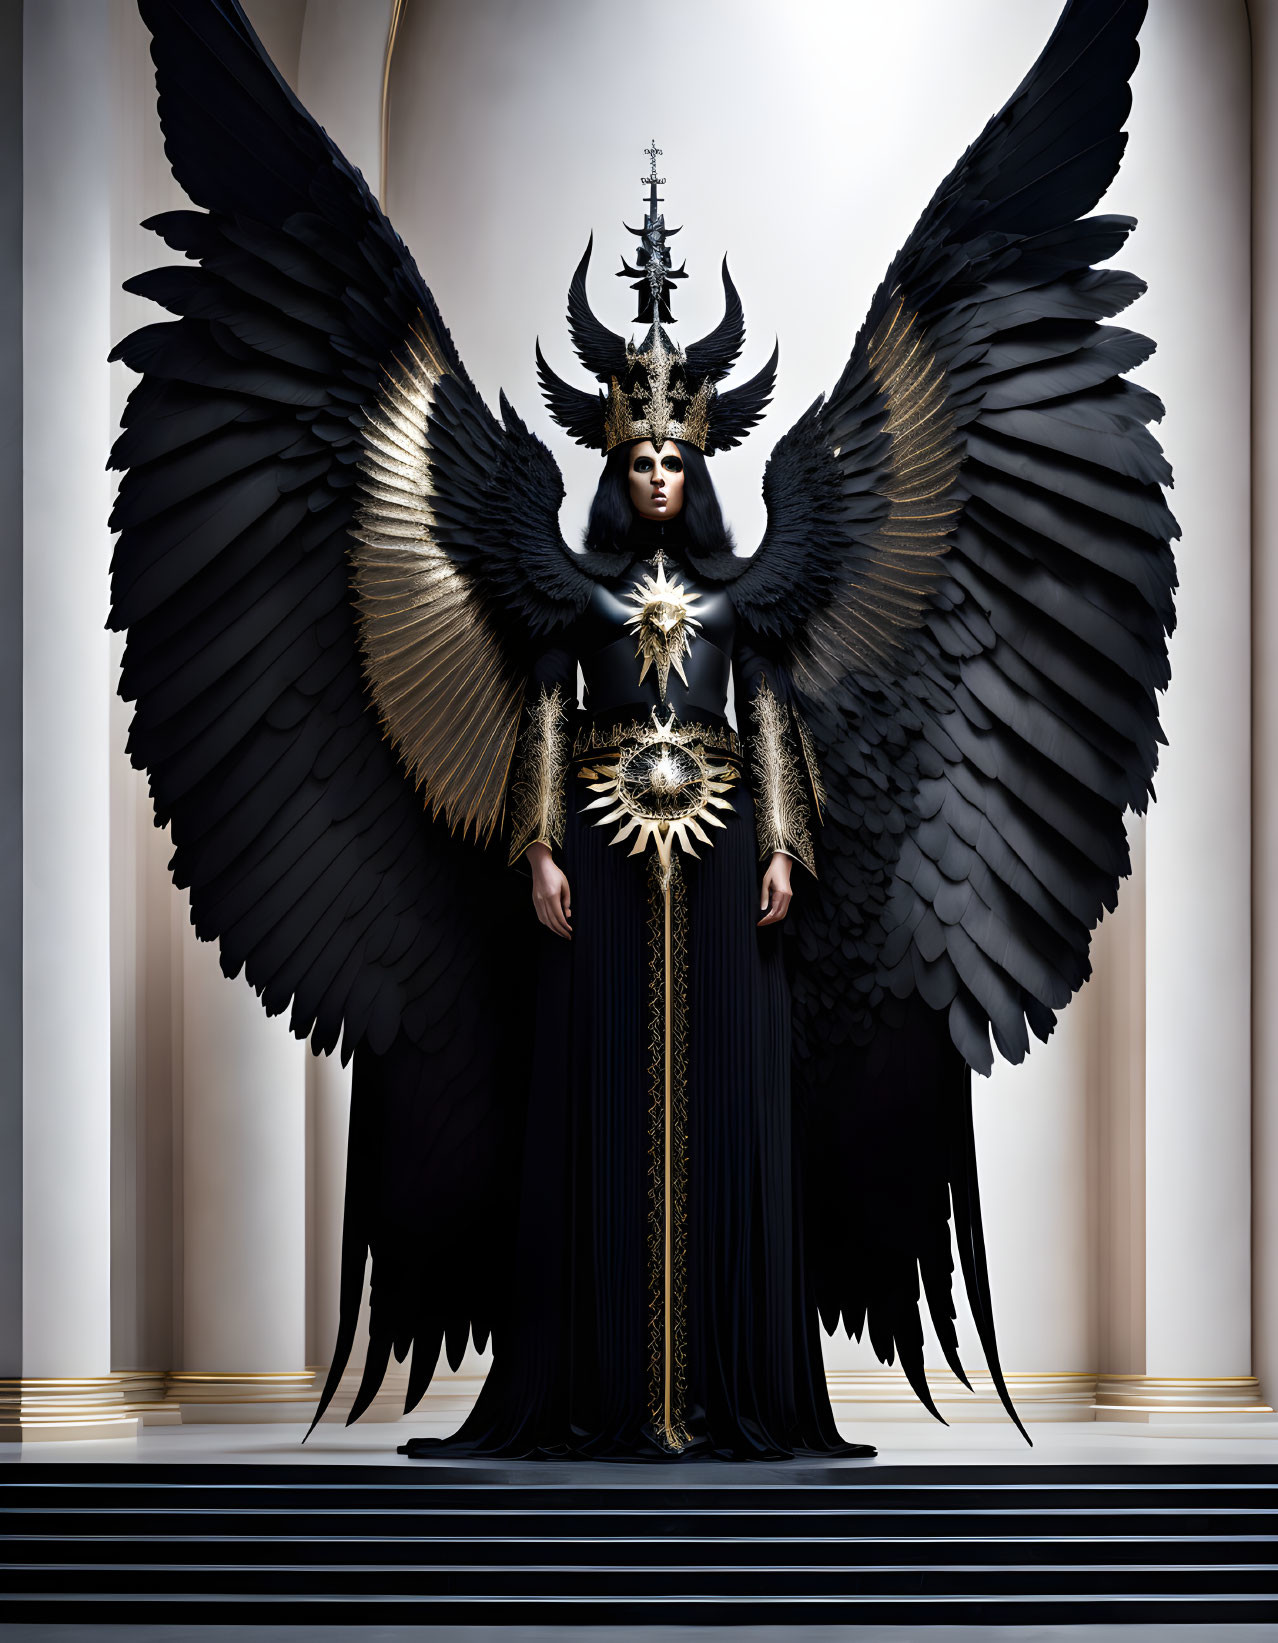 Majestic figure with black and gold wings in celestial-themed attire in columned hall